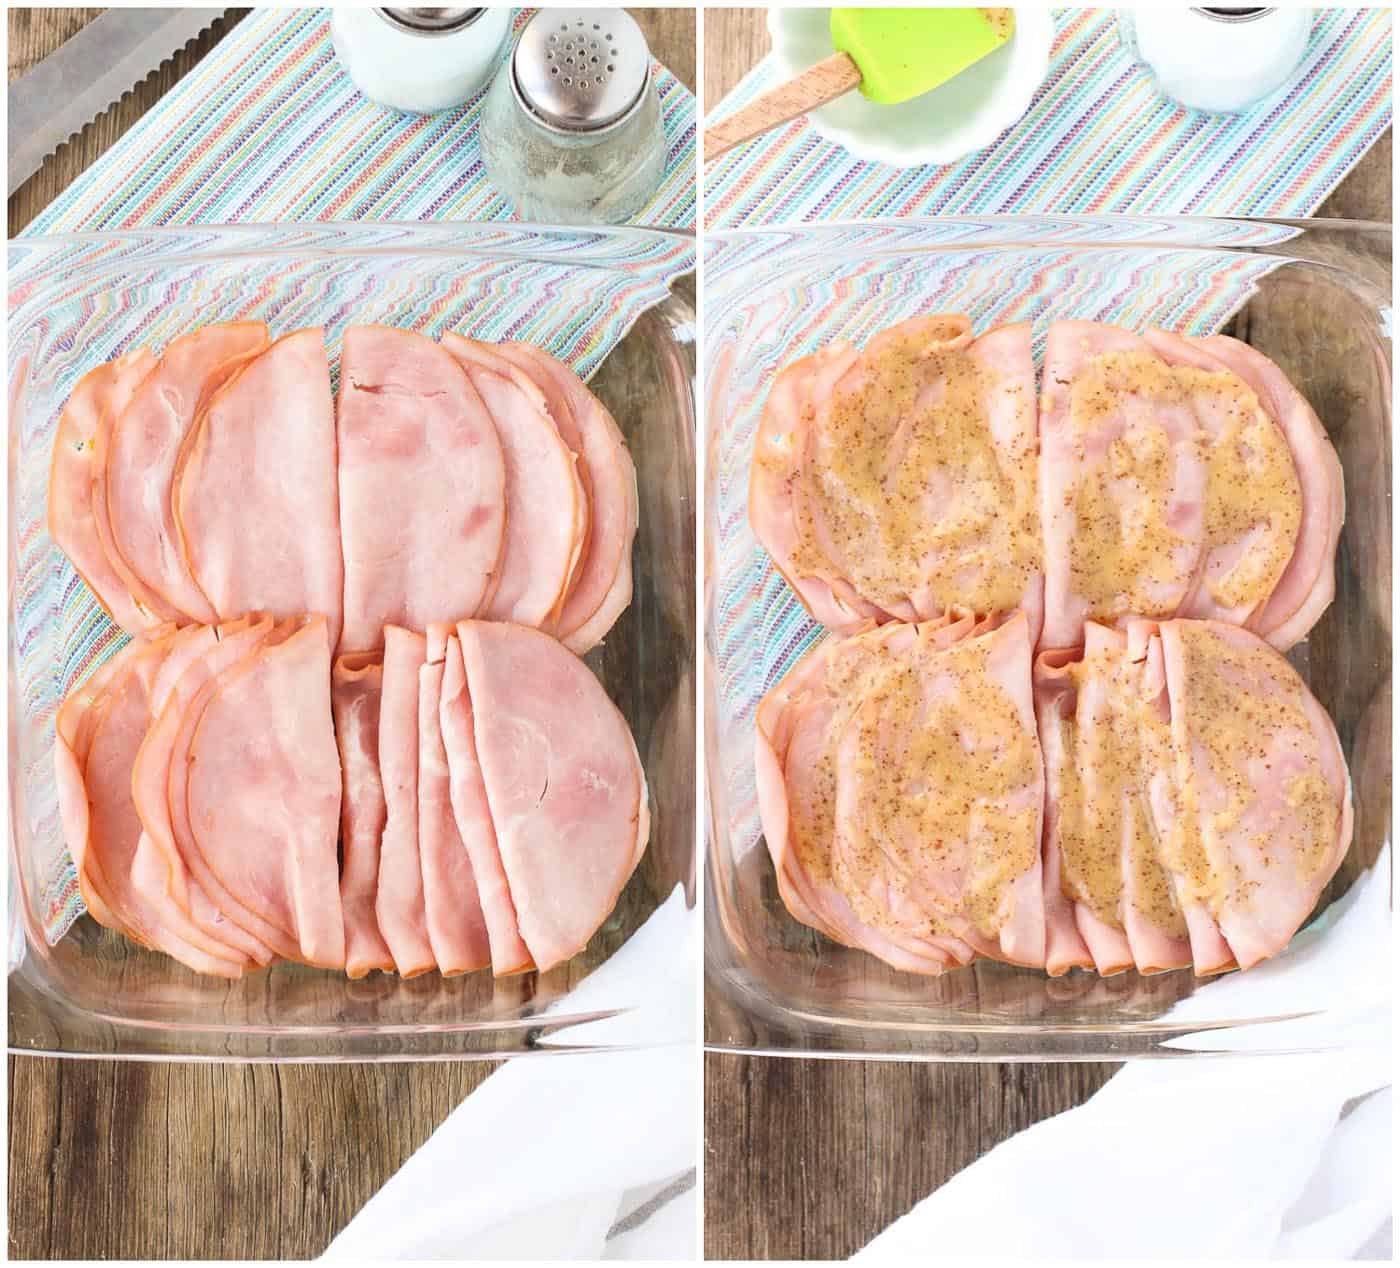 Ham layered on the sandwiches (left) and after spreading on the mustard sauce (right).